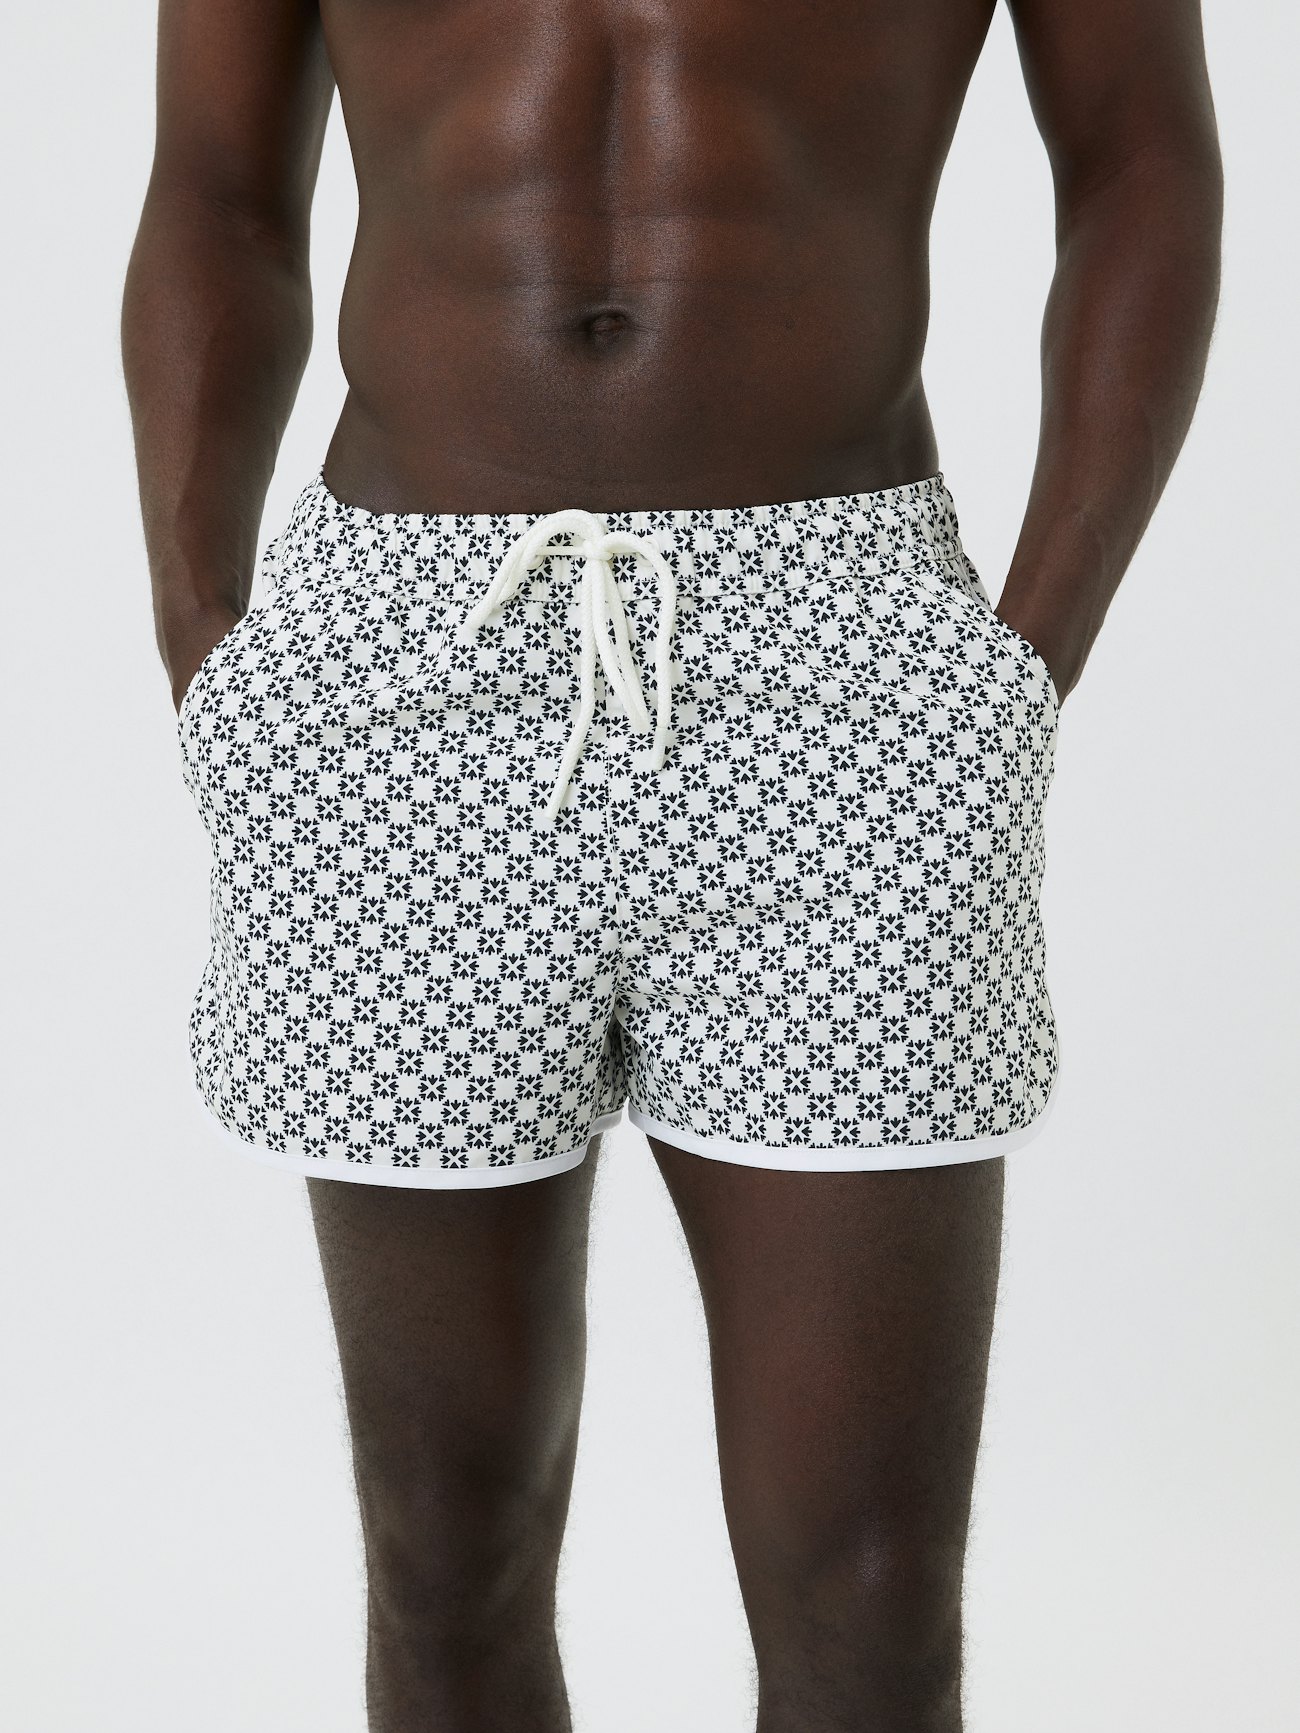 Louis Vuitton Mens Swimwear, Multi, (All Sizes Need to Be Confirmed)